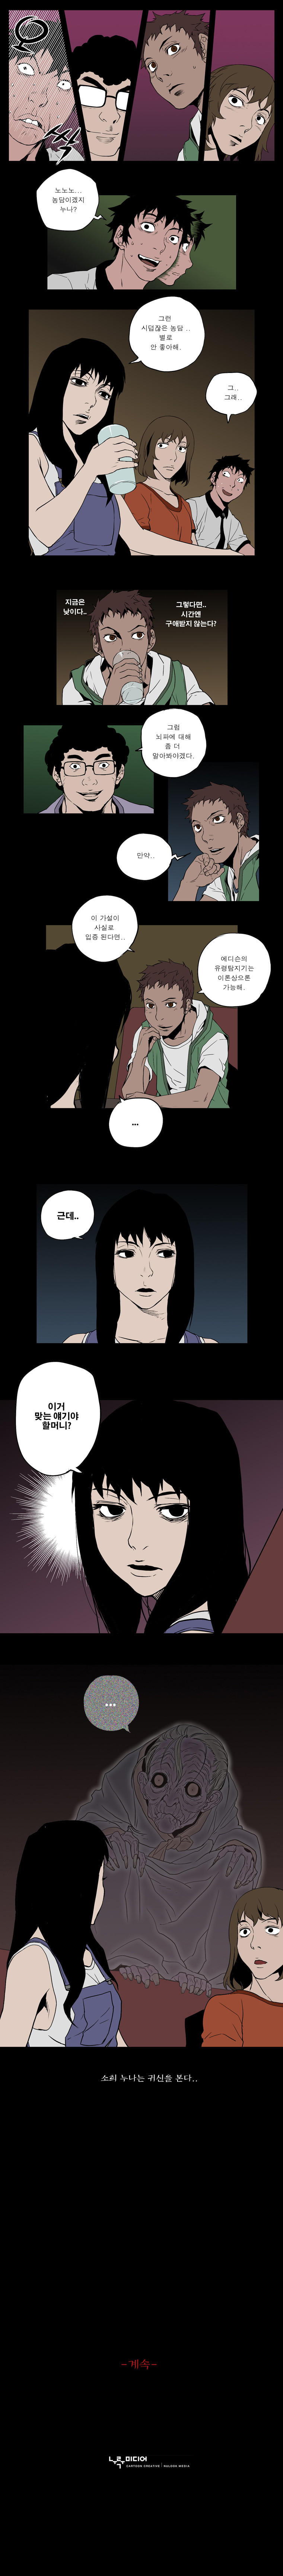 0.0MHz - Chapter 2-1 - Page 9